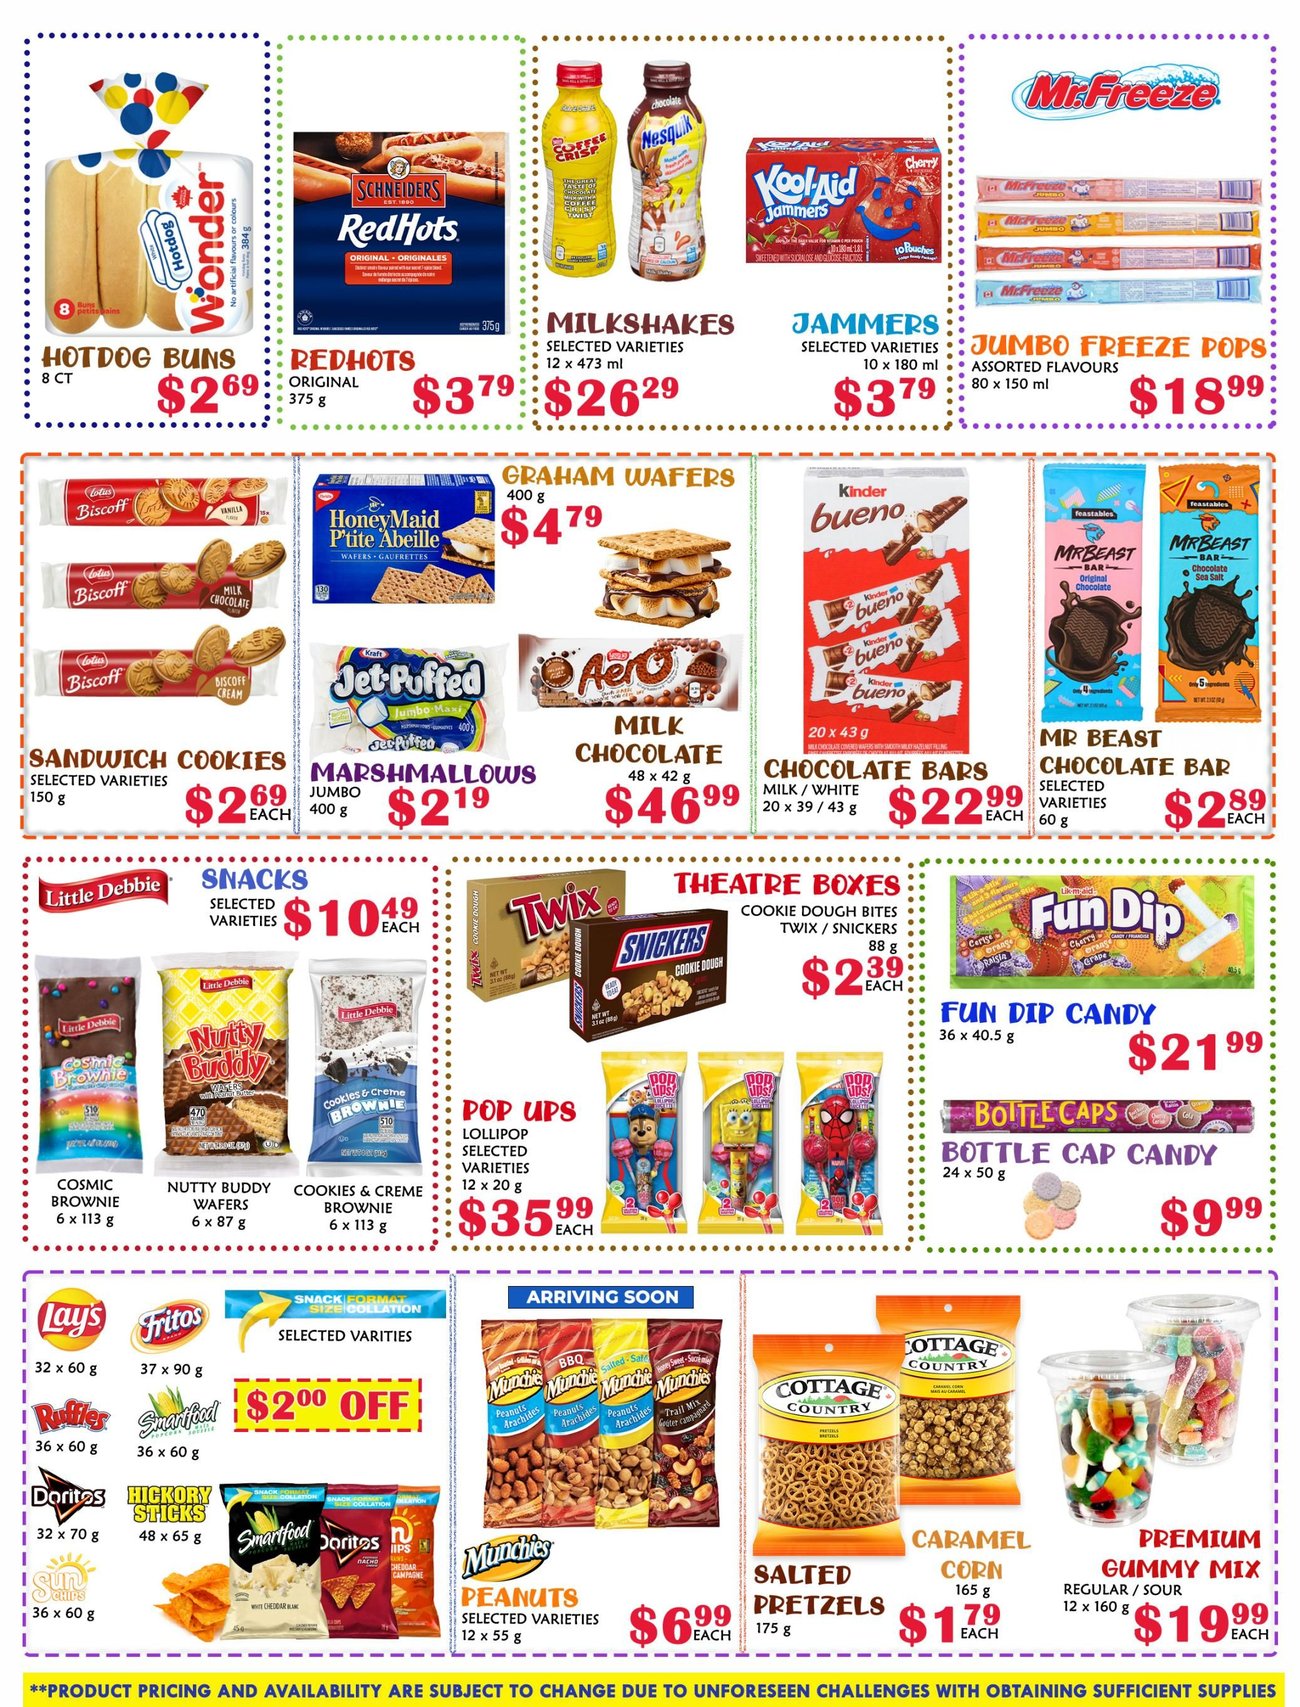 MVR Cash and Carry - Monthly Specials - Page 8